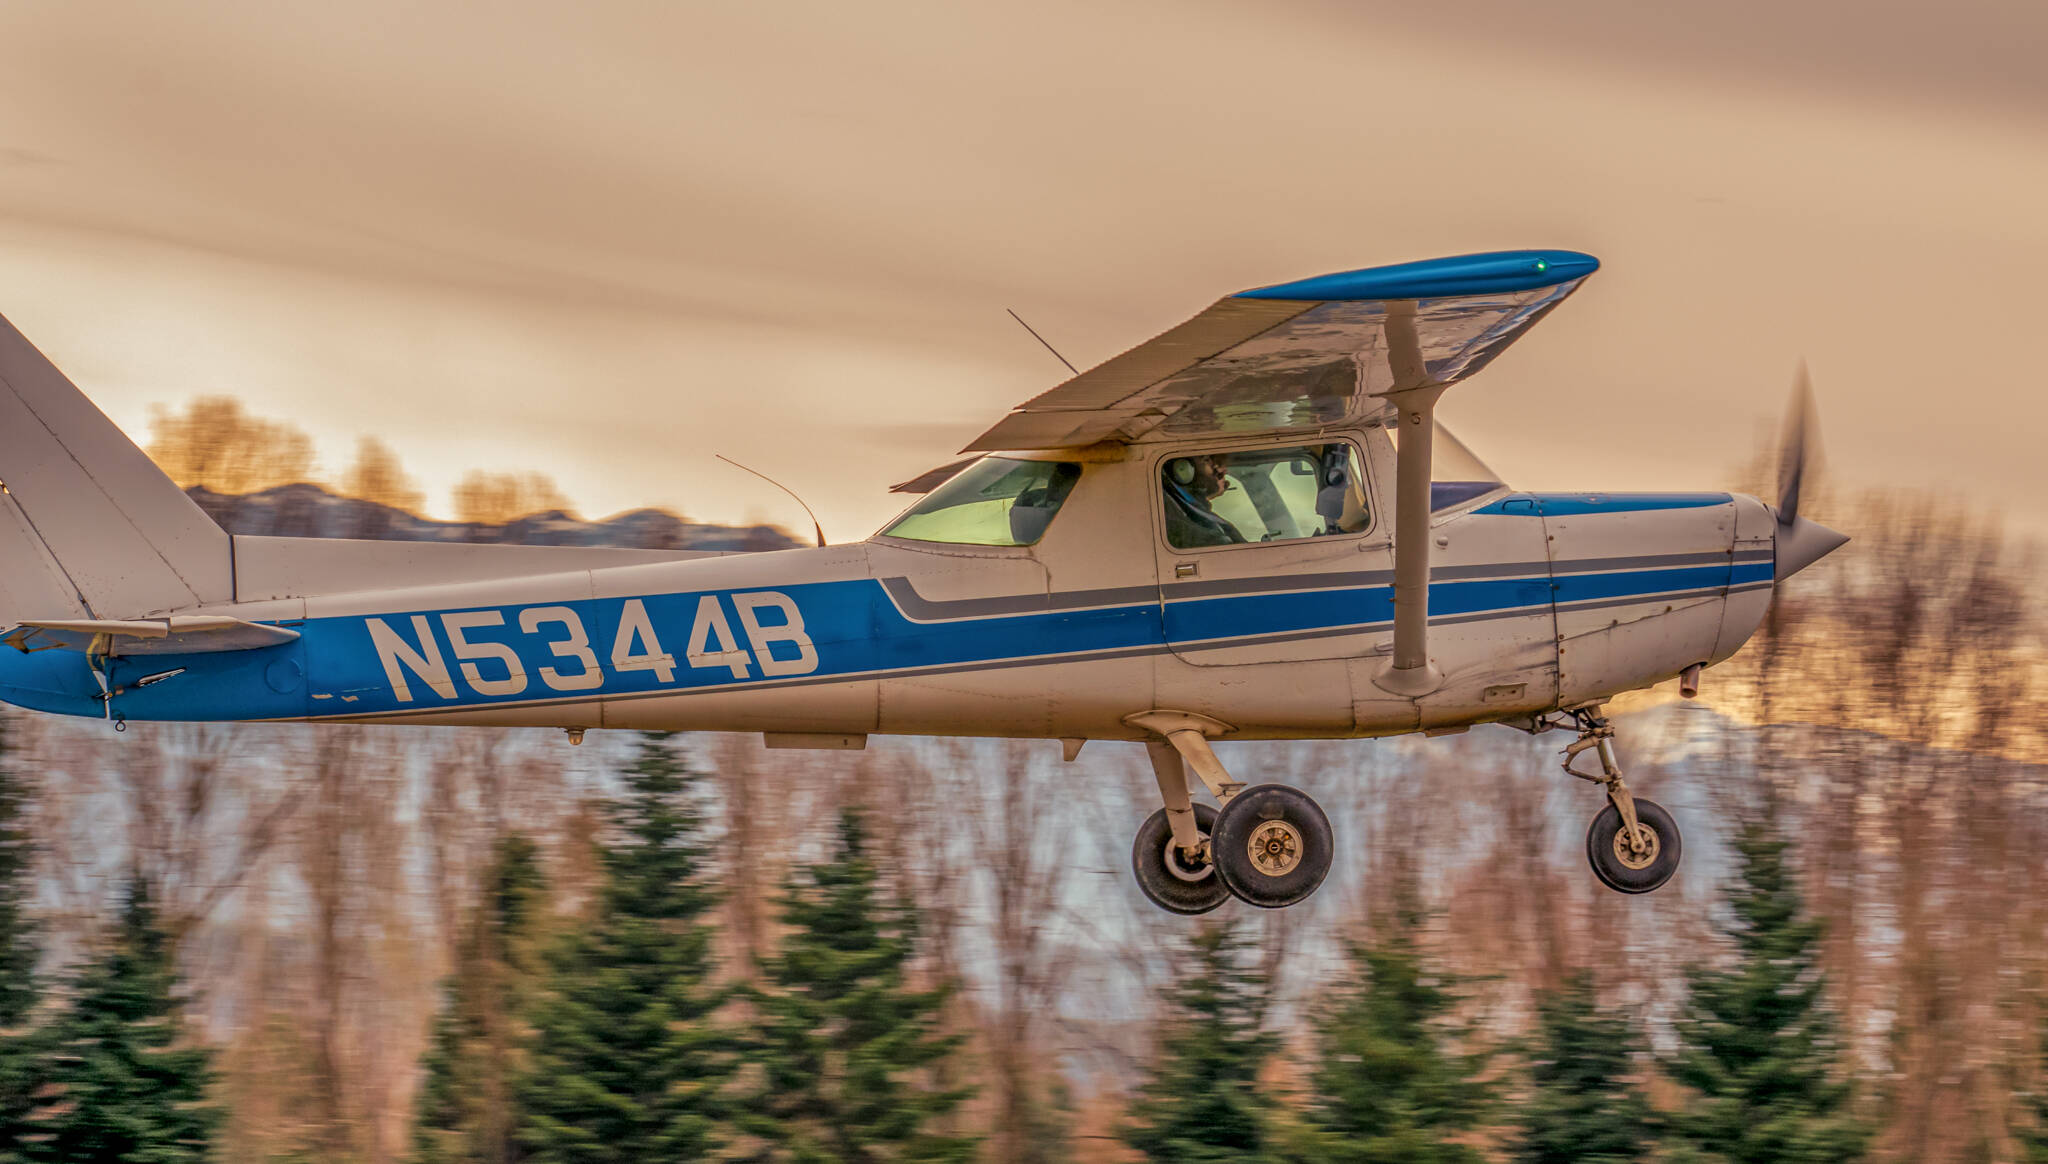 Photo by Jesse Nichol / Anatolian Eagle Flight Academy instructor Cenk Özer flies with student Connor Bear in a 1980 Cessna 152 trainer airplane.